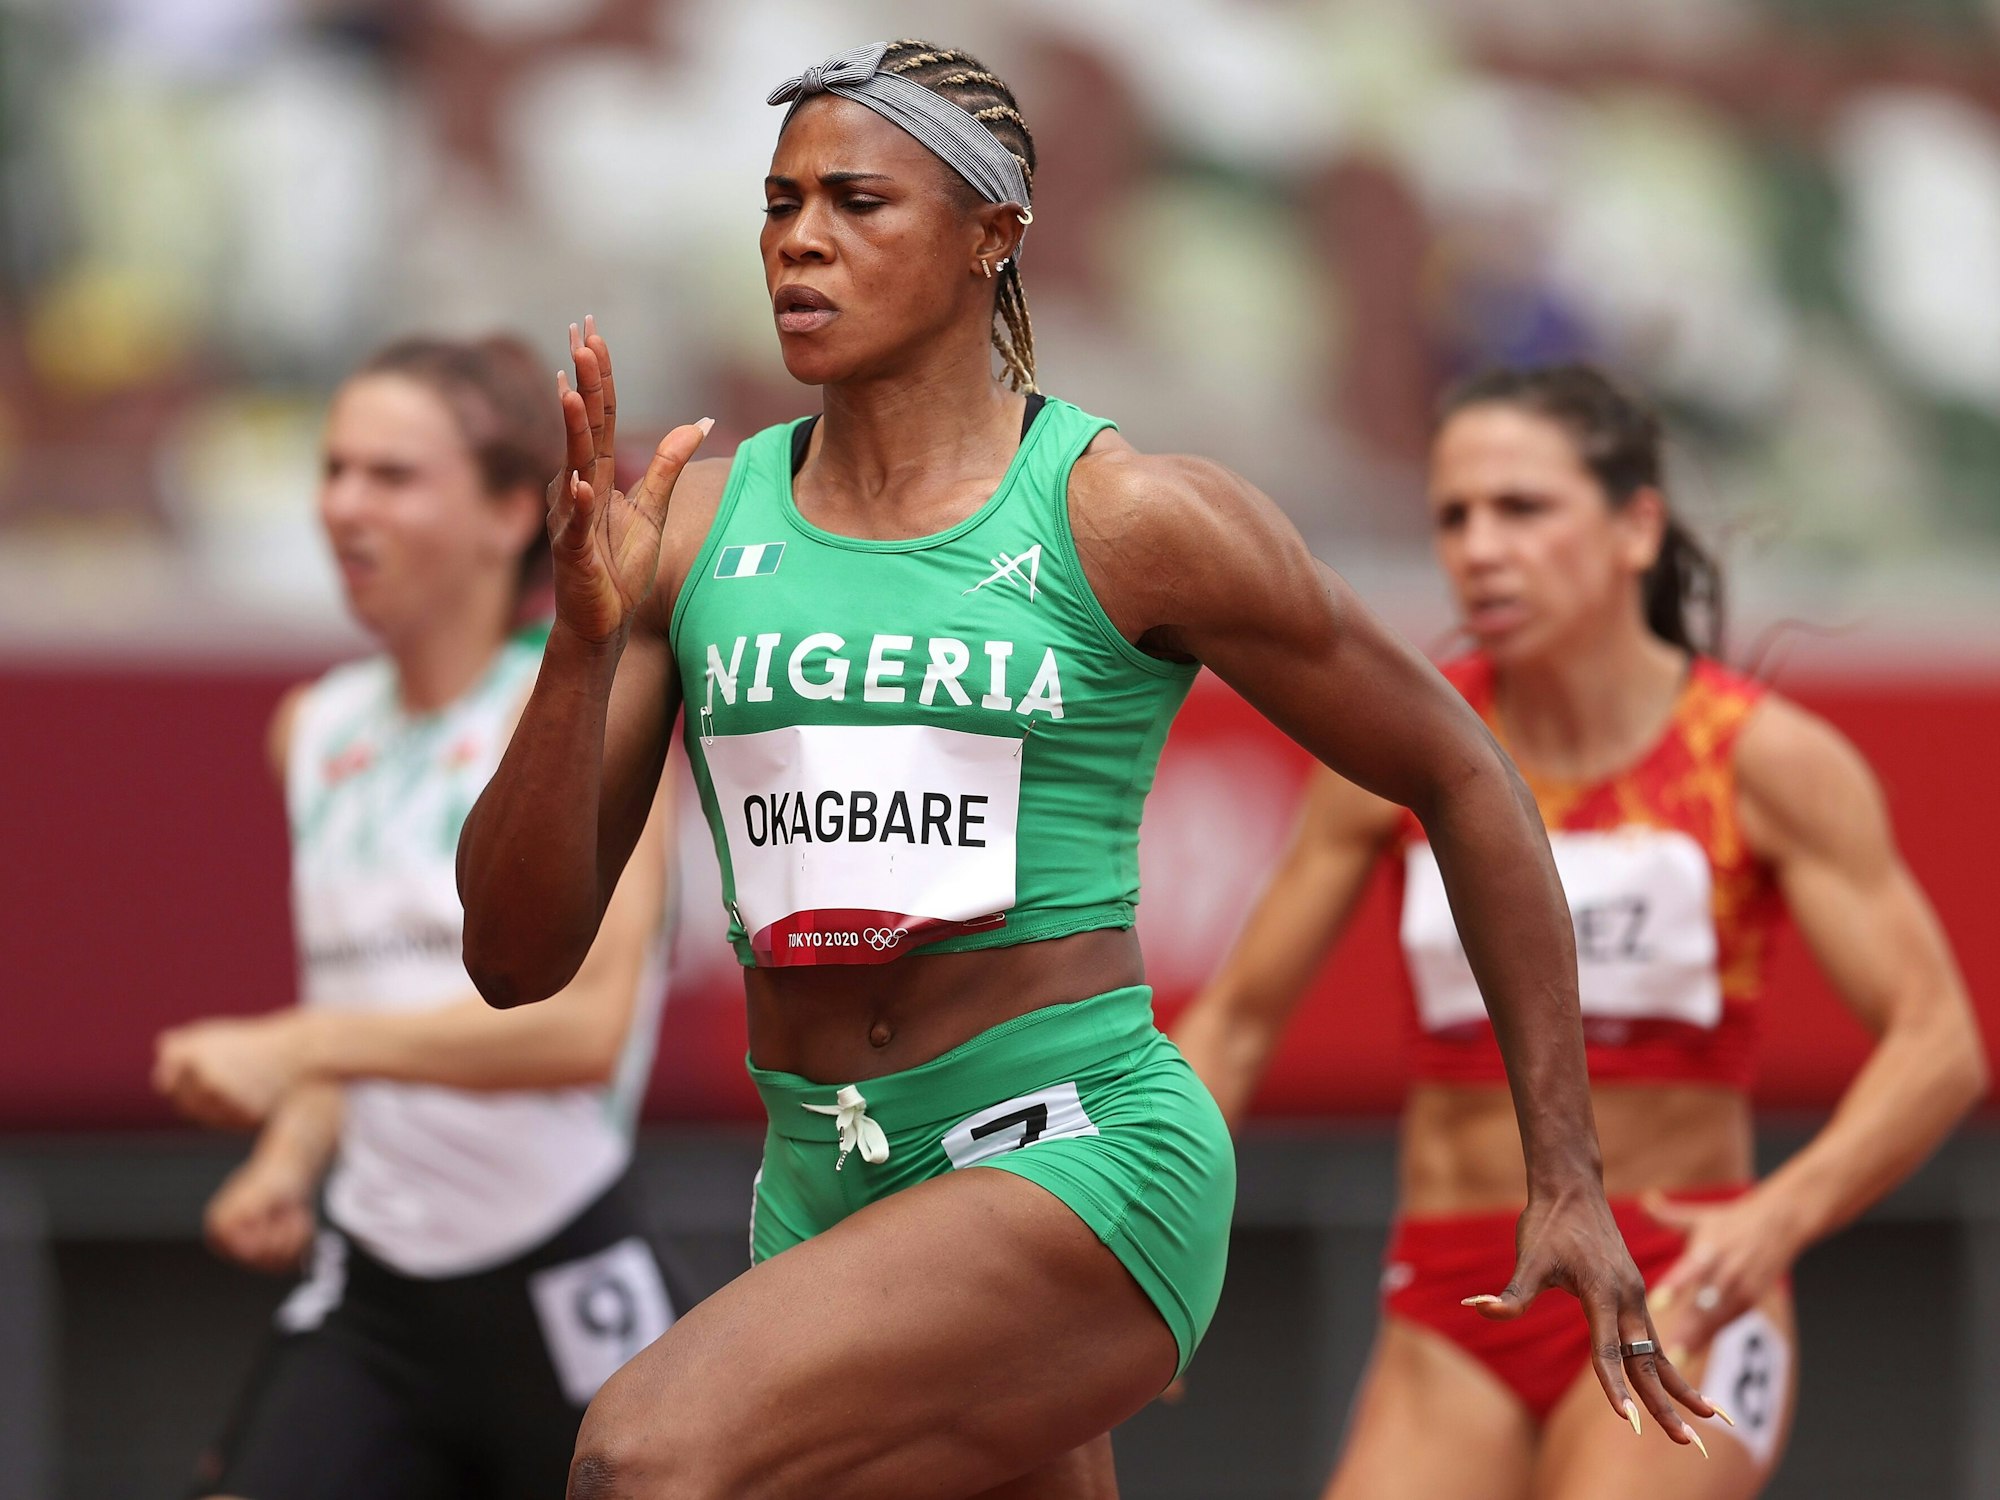 Blessing Okagbare (Nigeria) competes during round one of the Women's 100m heats on day seven of the Tokyo 2020 Olympic Games at Olympic Stadium on July 30, 2021 in Tokyo, Japan. (Photo by Patrick Smith/Getty Images)